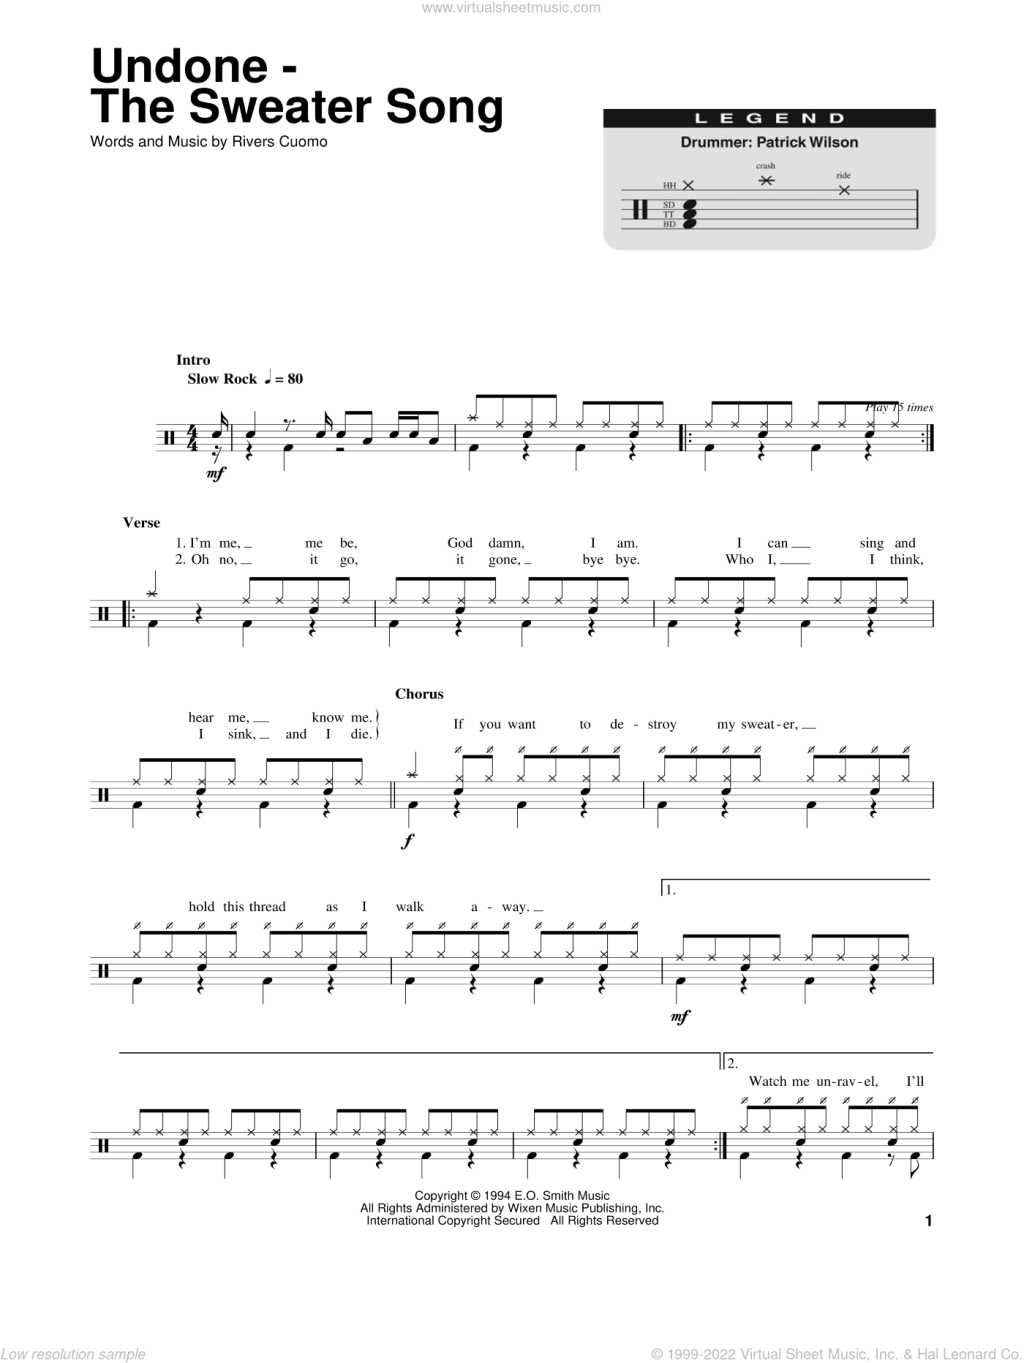 undone drum sheet music - Undone - The Sweater Song sheet music for drums (PDF)